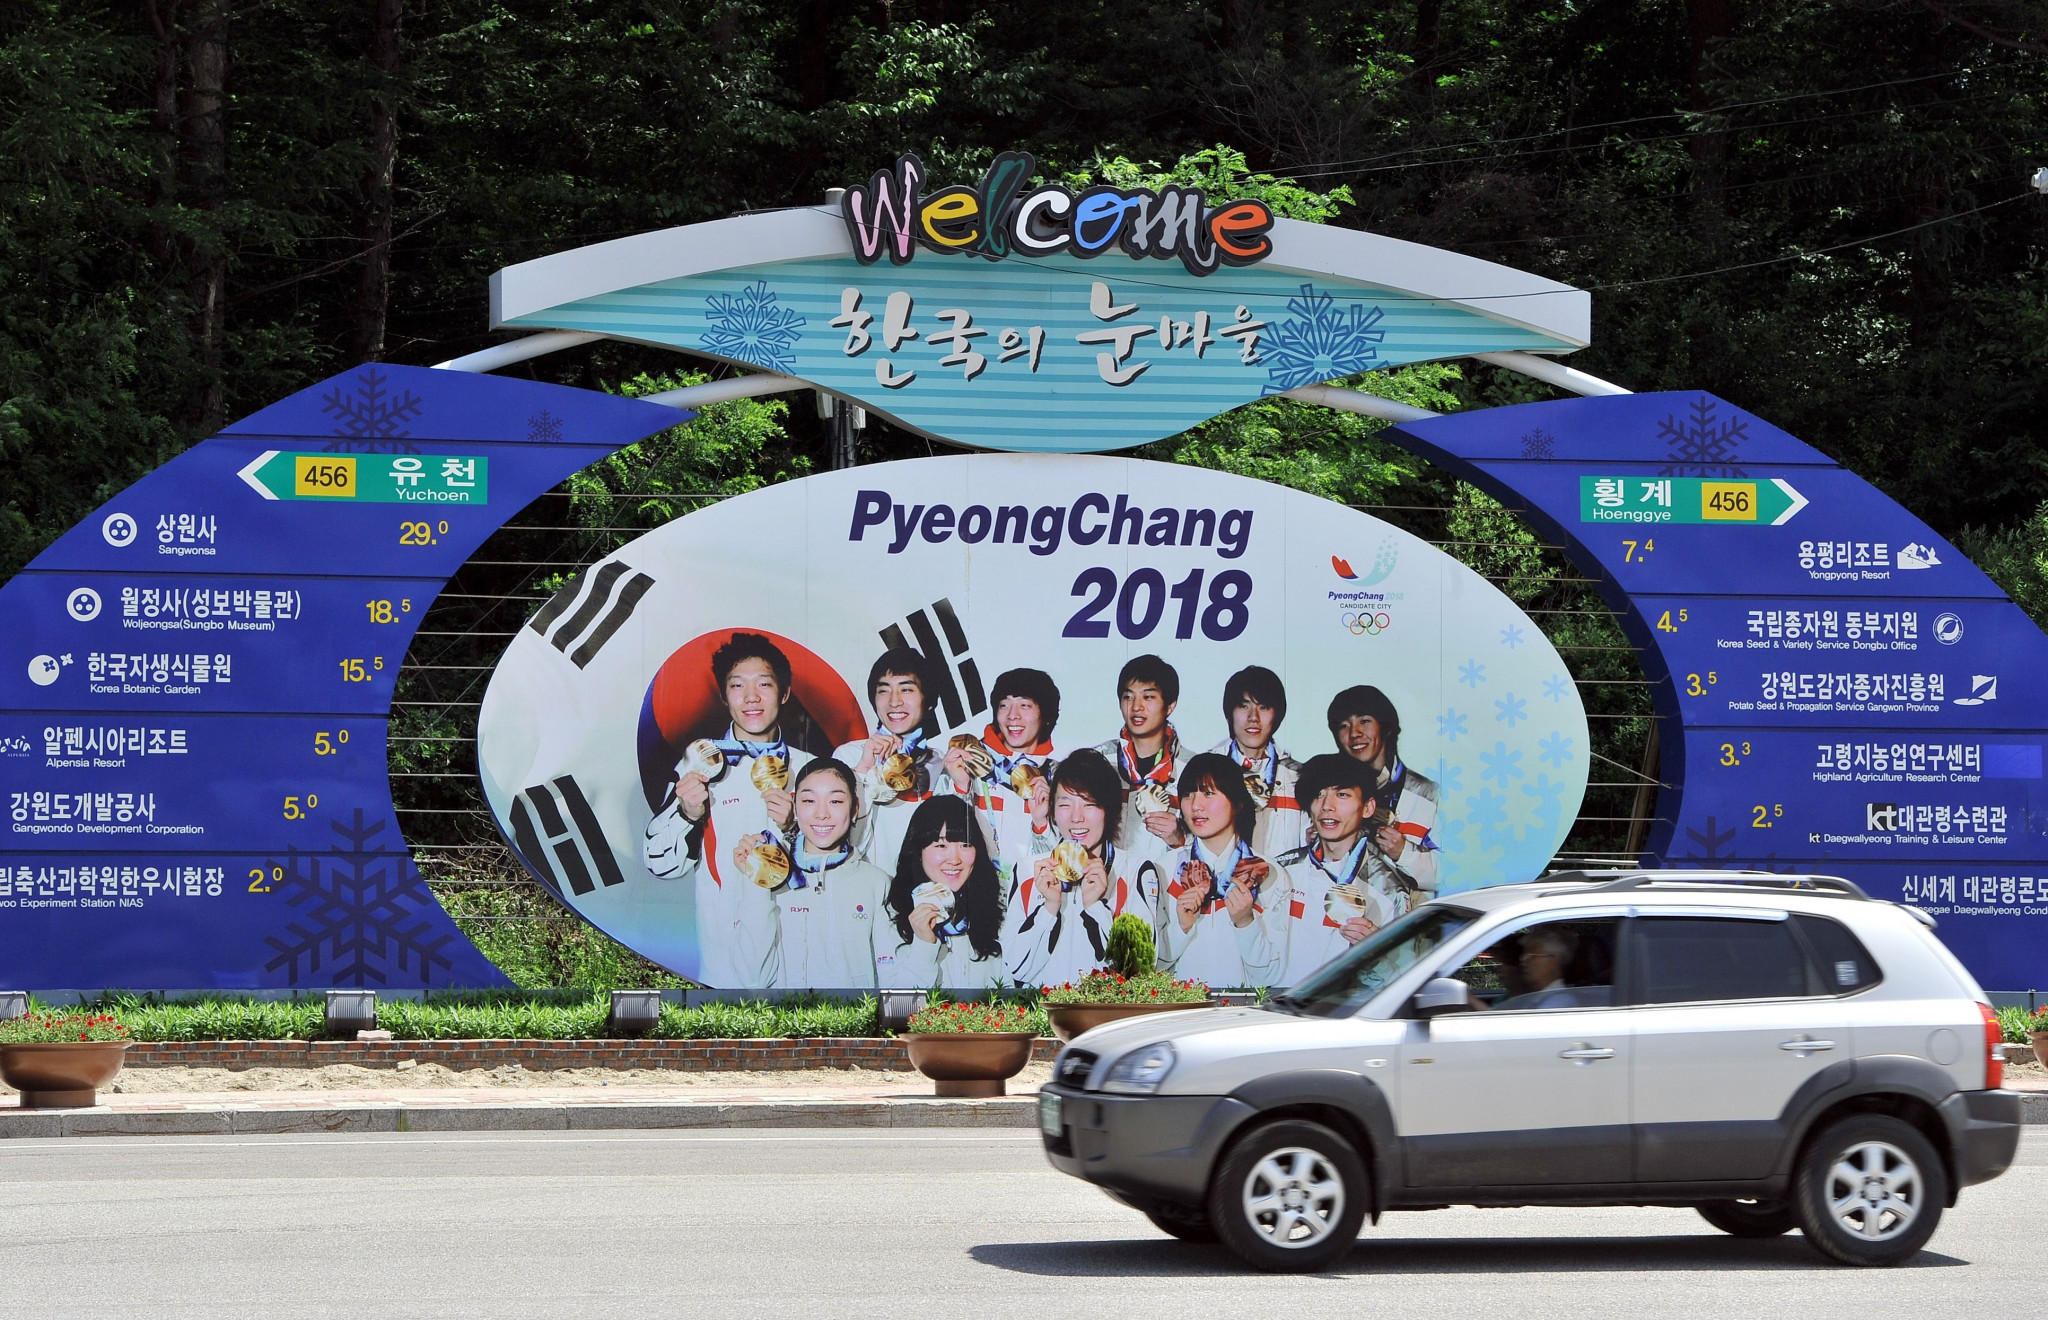 Pyeongchang 2018 to provide parking lots accommodating more than 10,000 vehicles during Winter Games